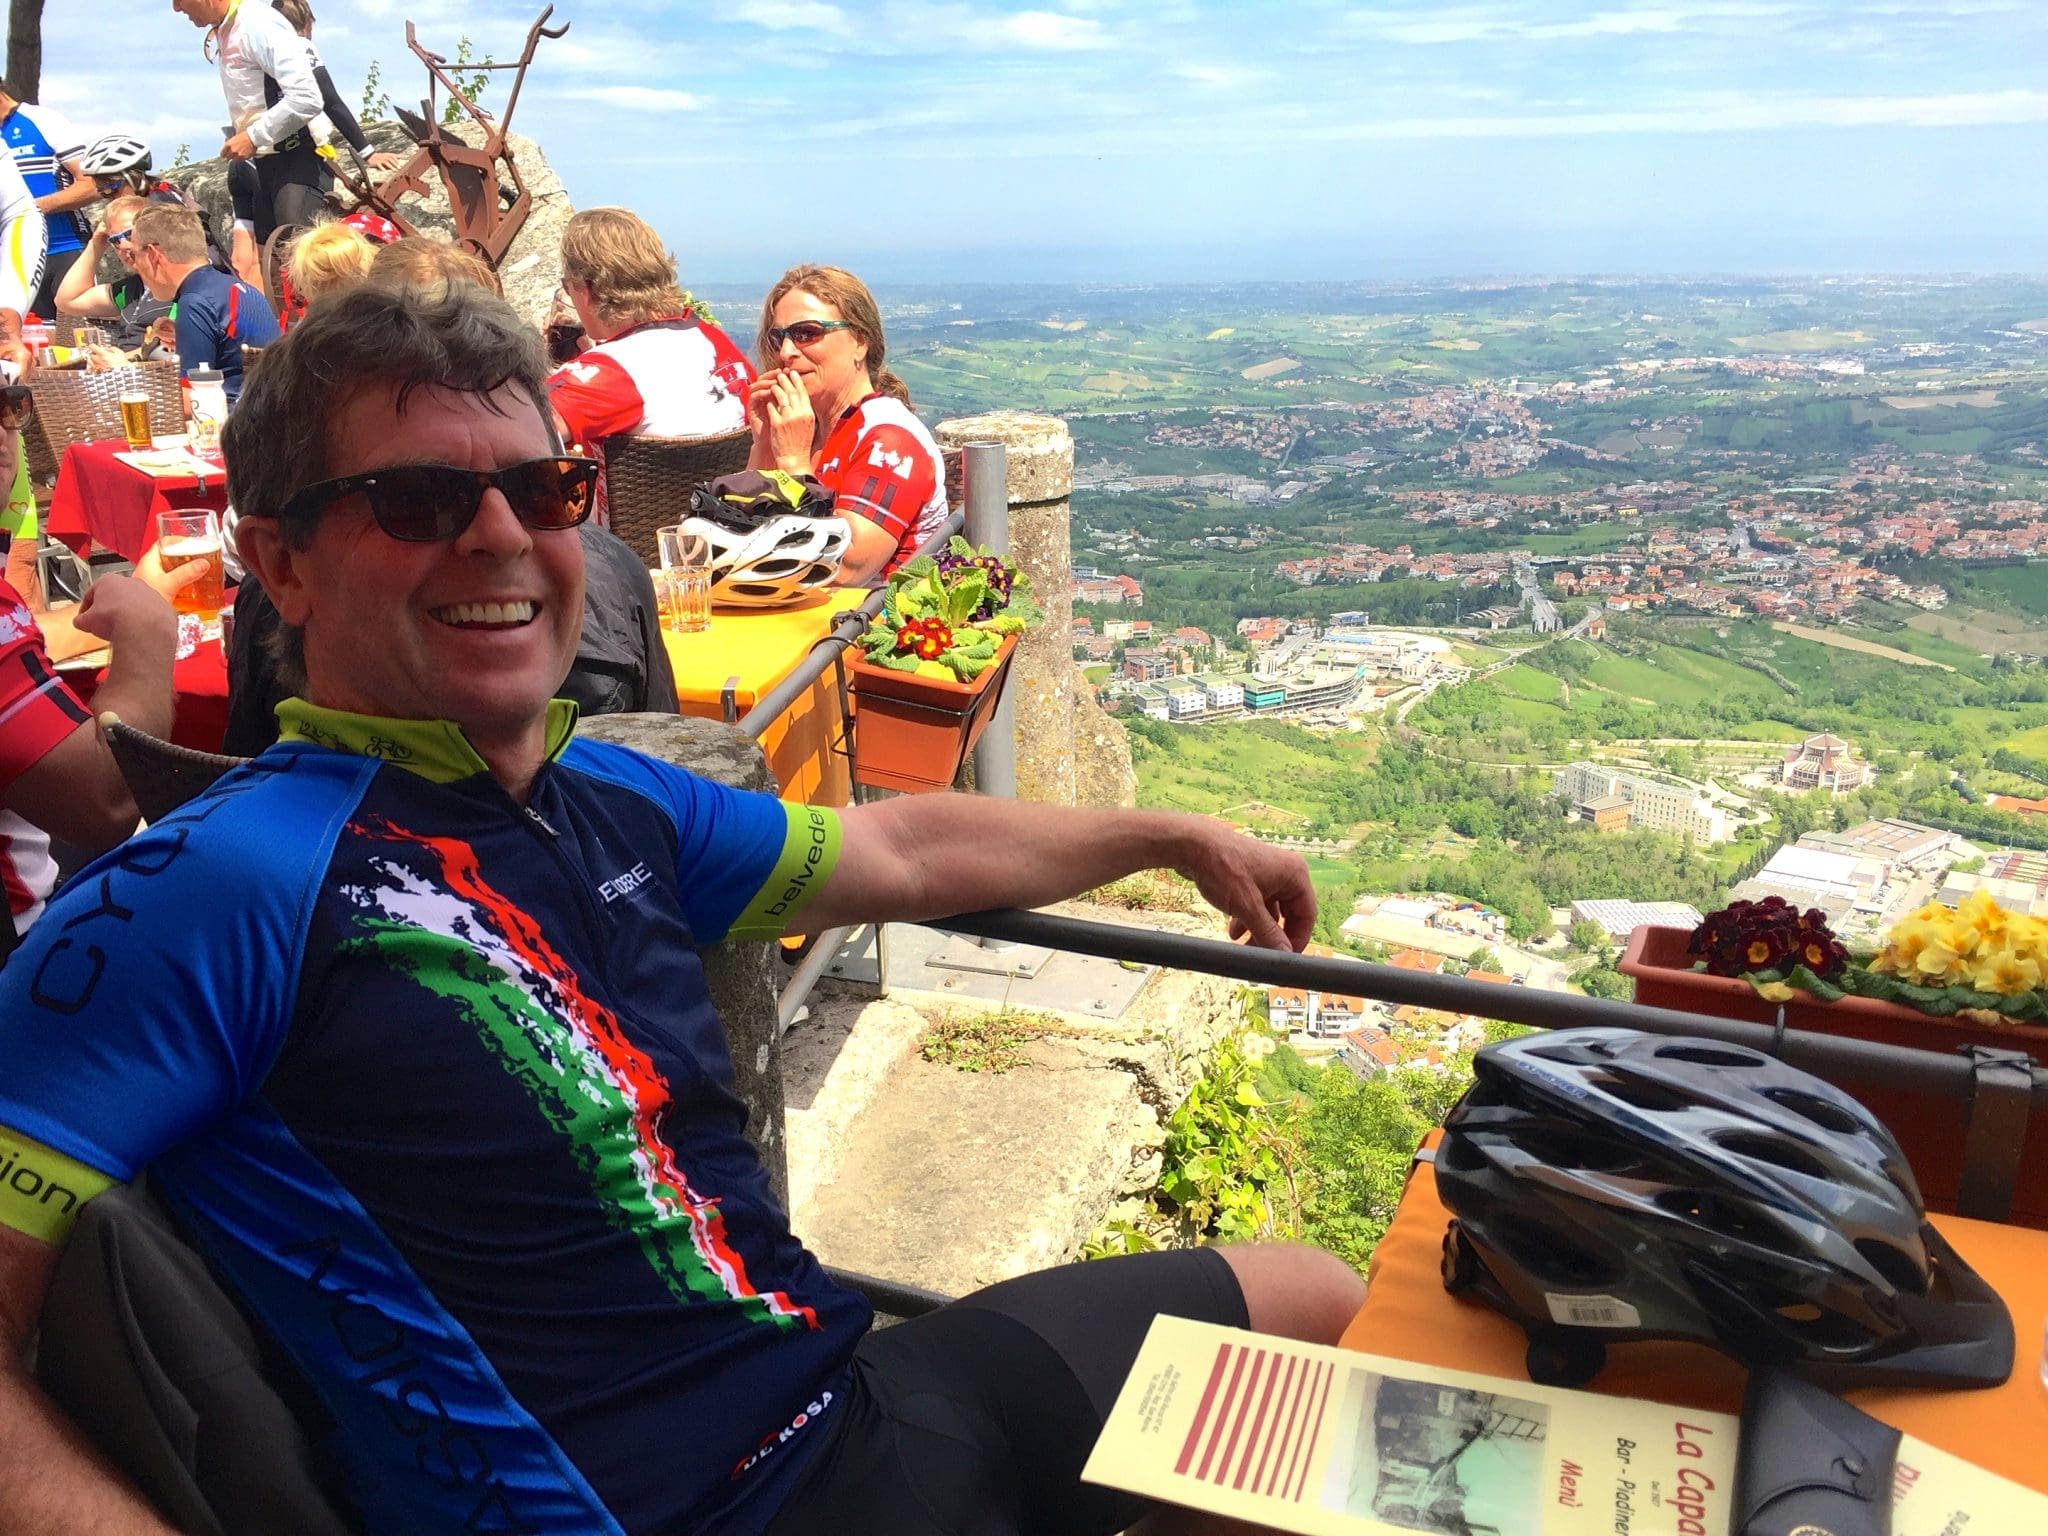 Gerry enjoys a well-deserved break after biking from the coast to the summit of San Marino